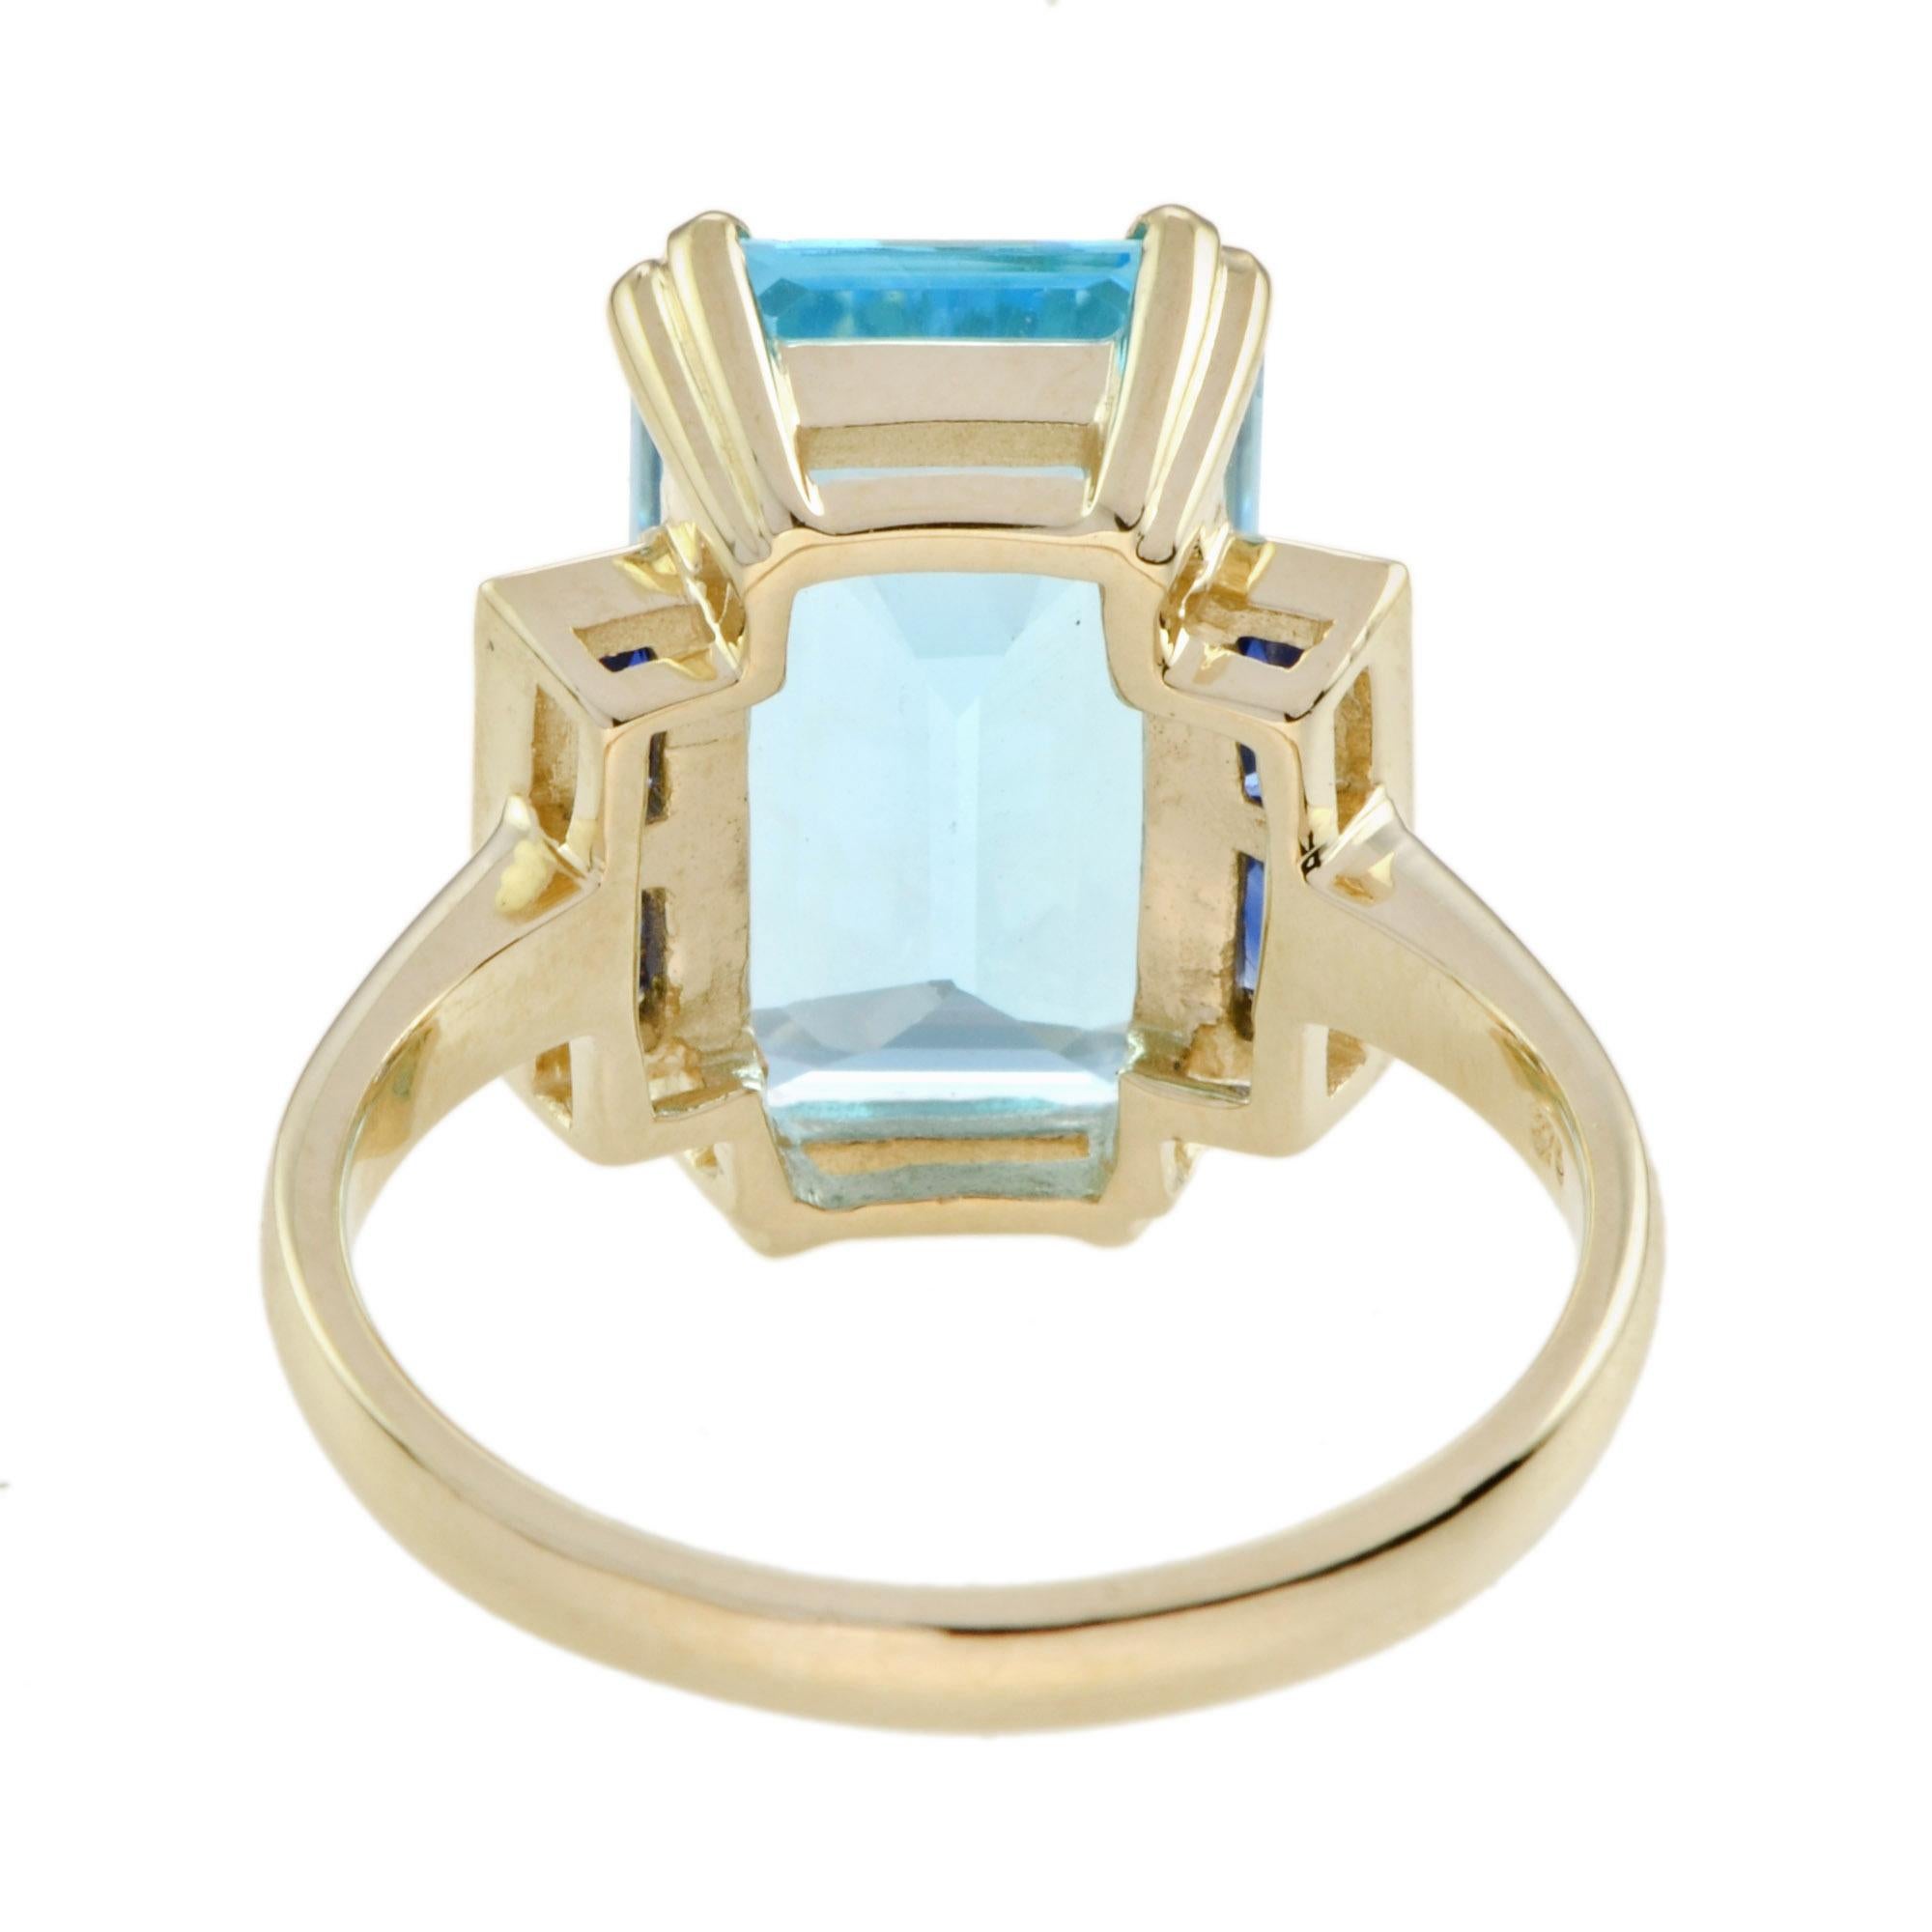 For Sale:  Emerald Cut Blue Topaz and Sapphire Art Deco Style Solitaire Ring in 14k Gold 6